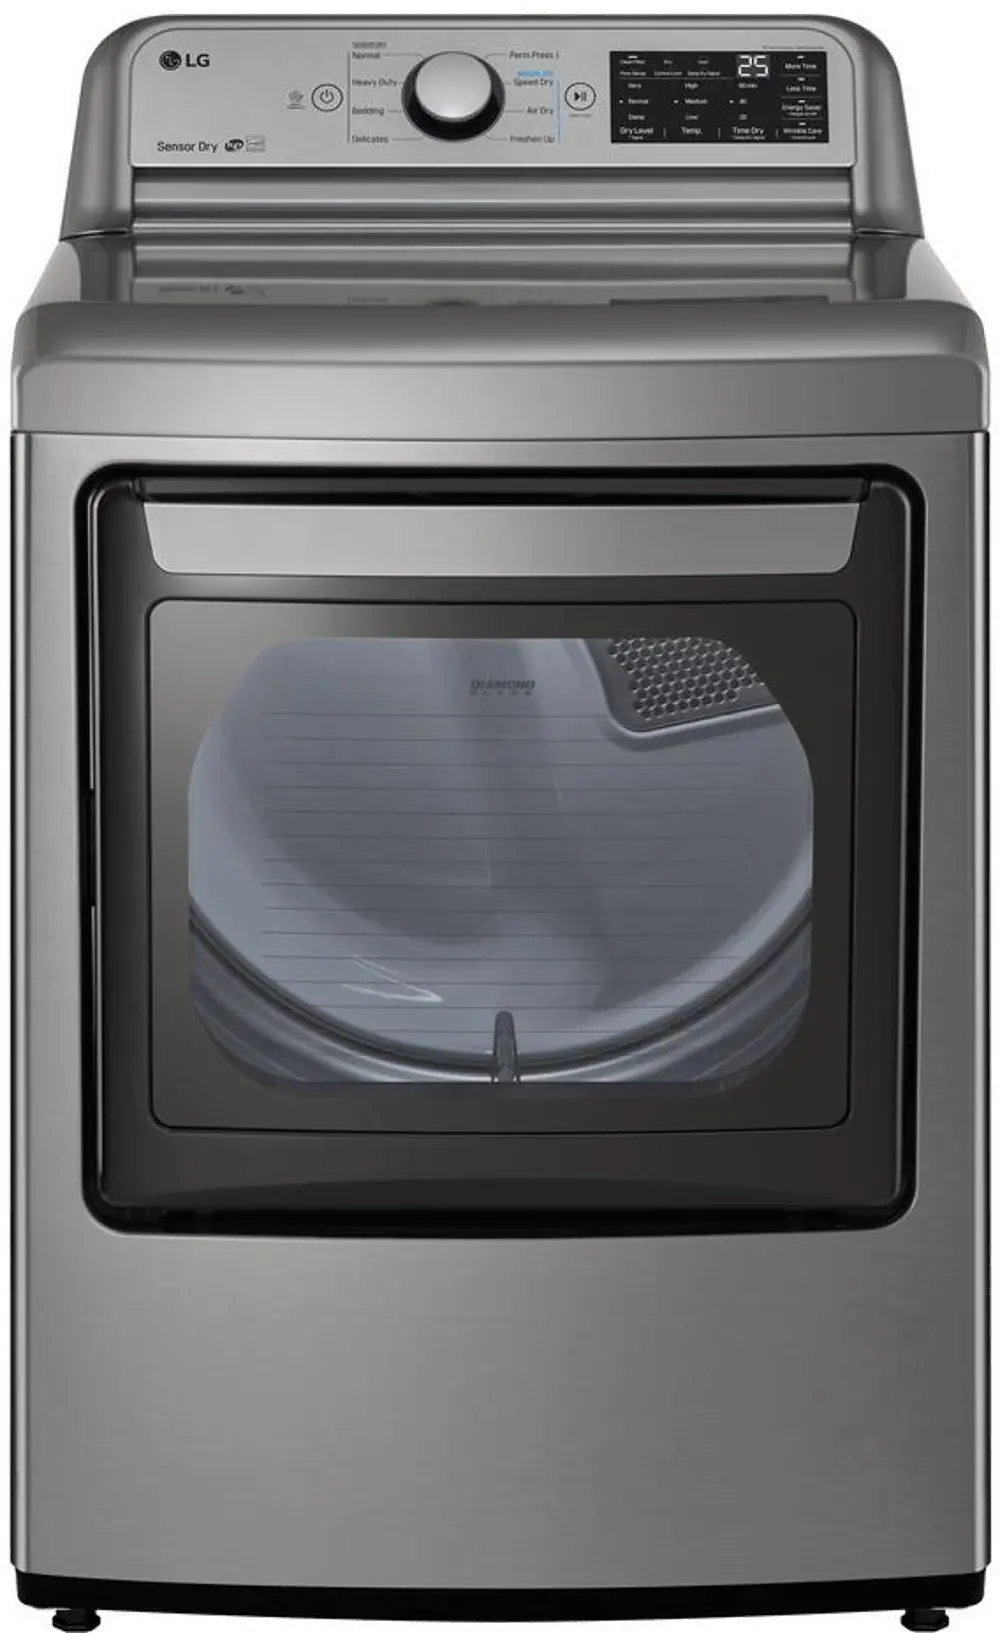 DLE7060VE LG 7.3 cu. ft. Electric Dryer with Sensor Dry Technology - Graphite Steel-1